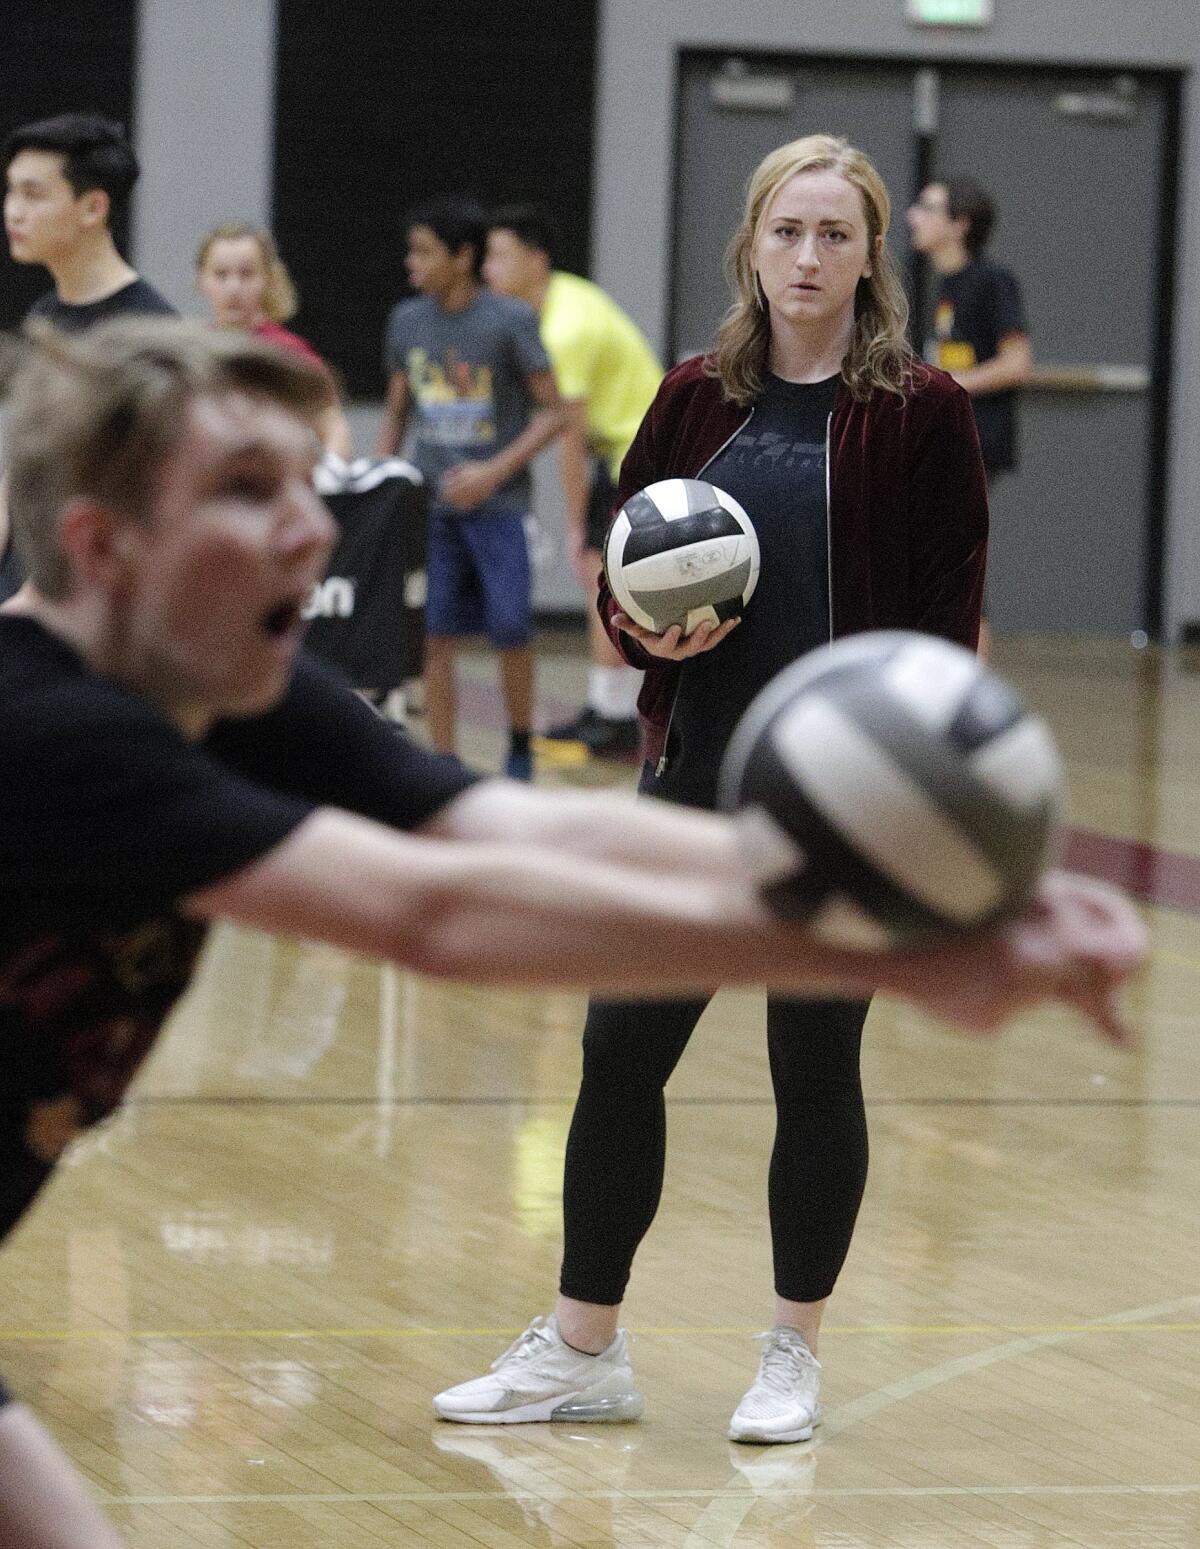 La Cañada High boys' volleyball first-year coach Laura Browder oversees drills during a recent practice.